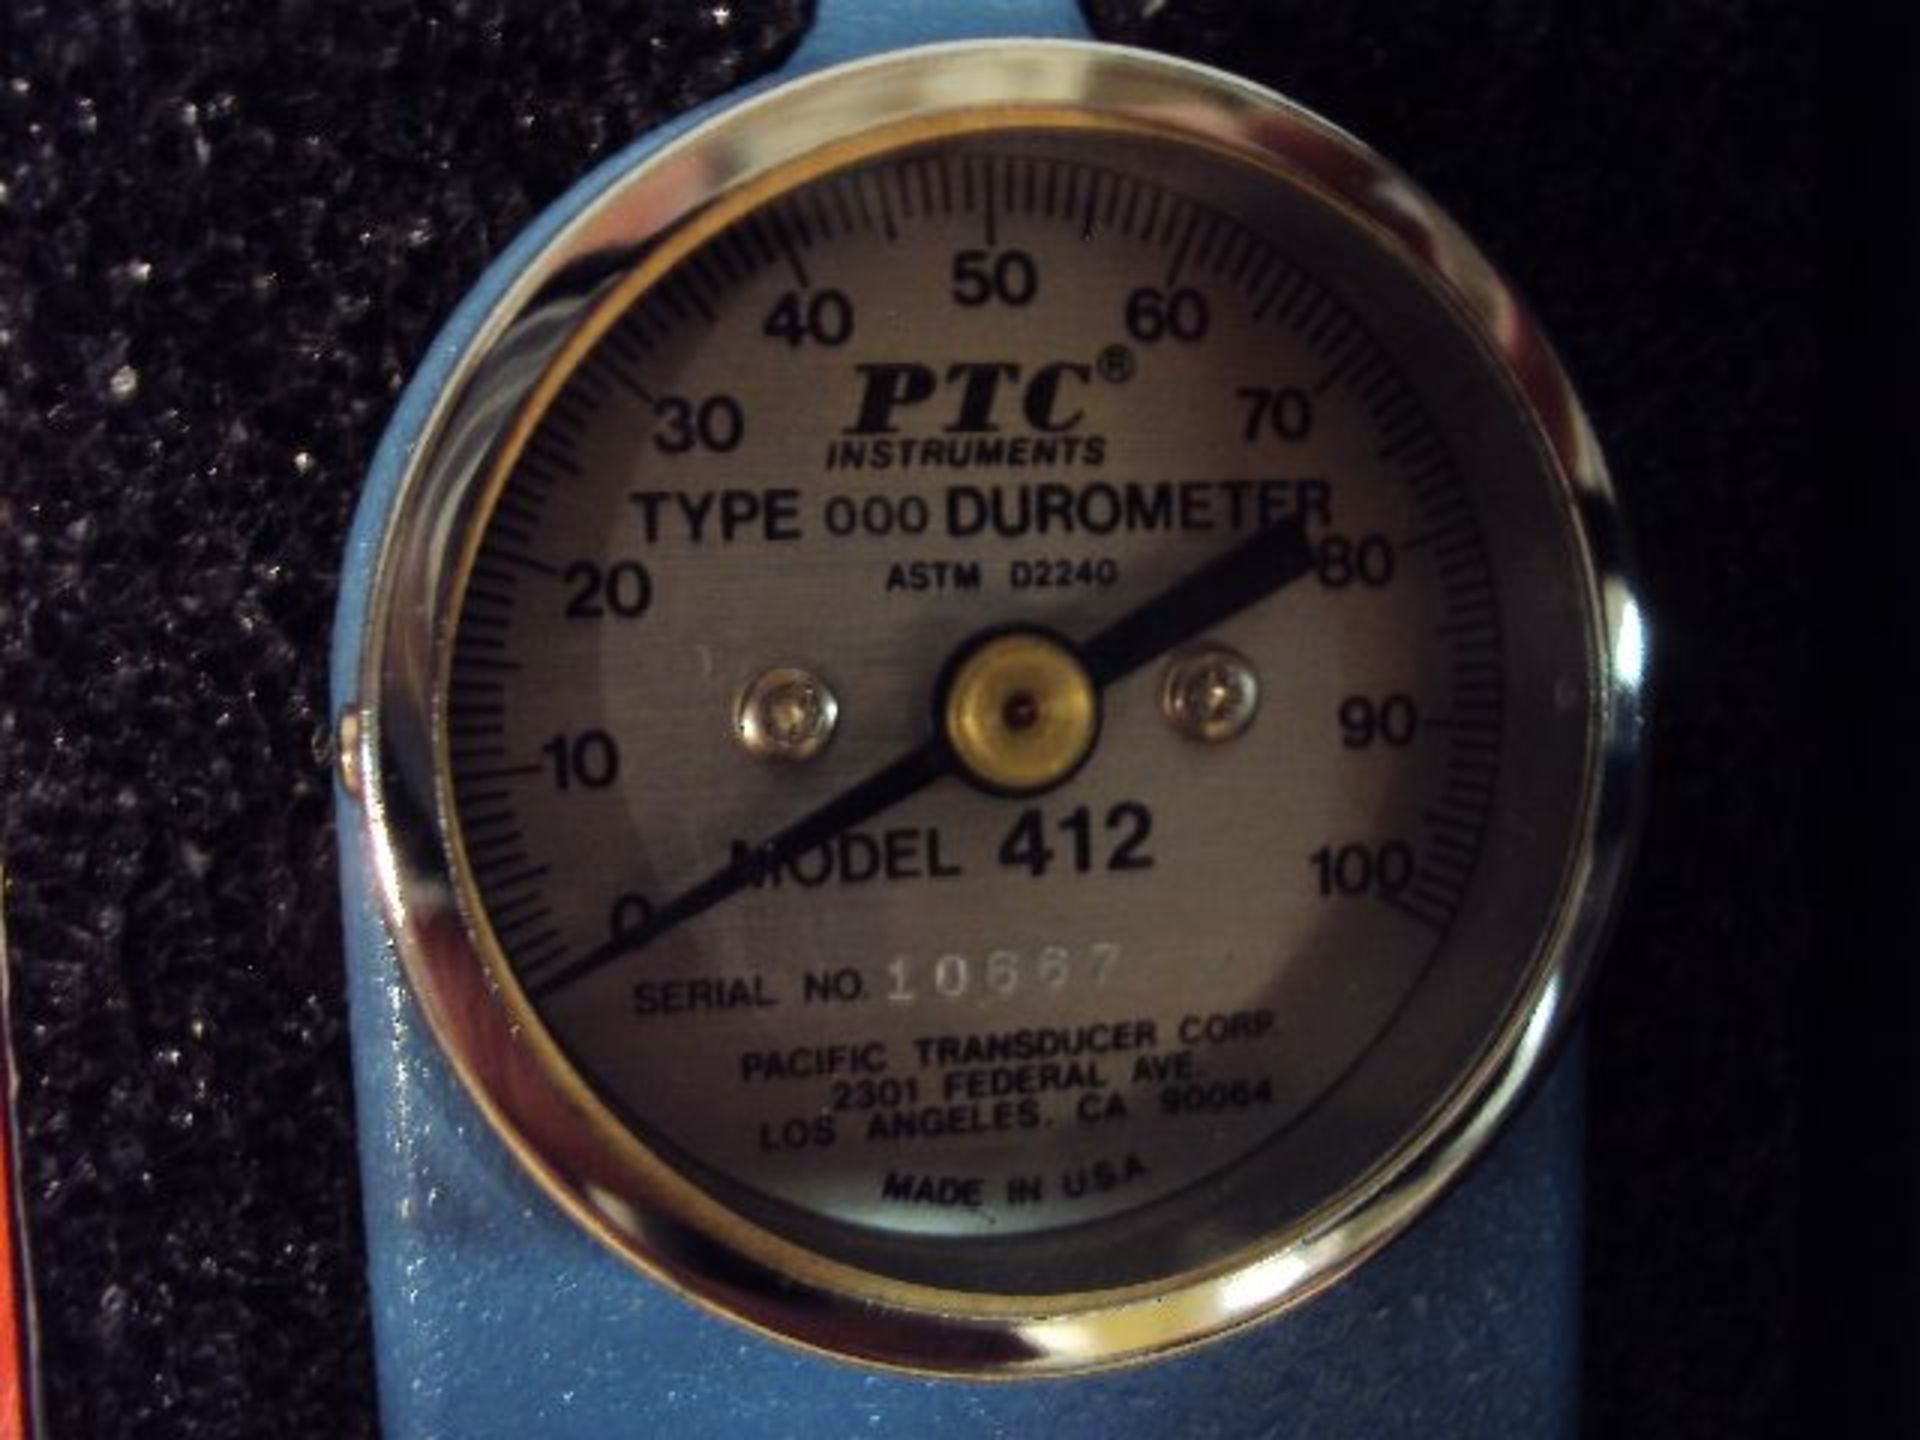 PTC Model 412 Tyoe 000 Durometer Hardness Tester with Test Standard in Padded Case - Image 2 of 5